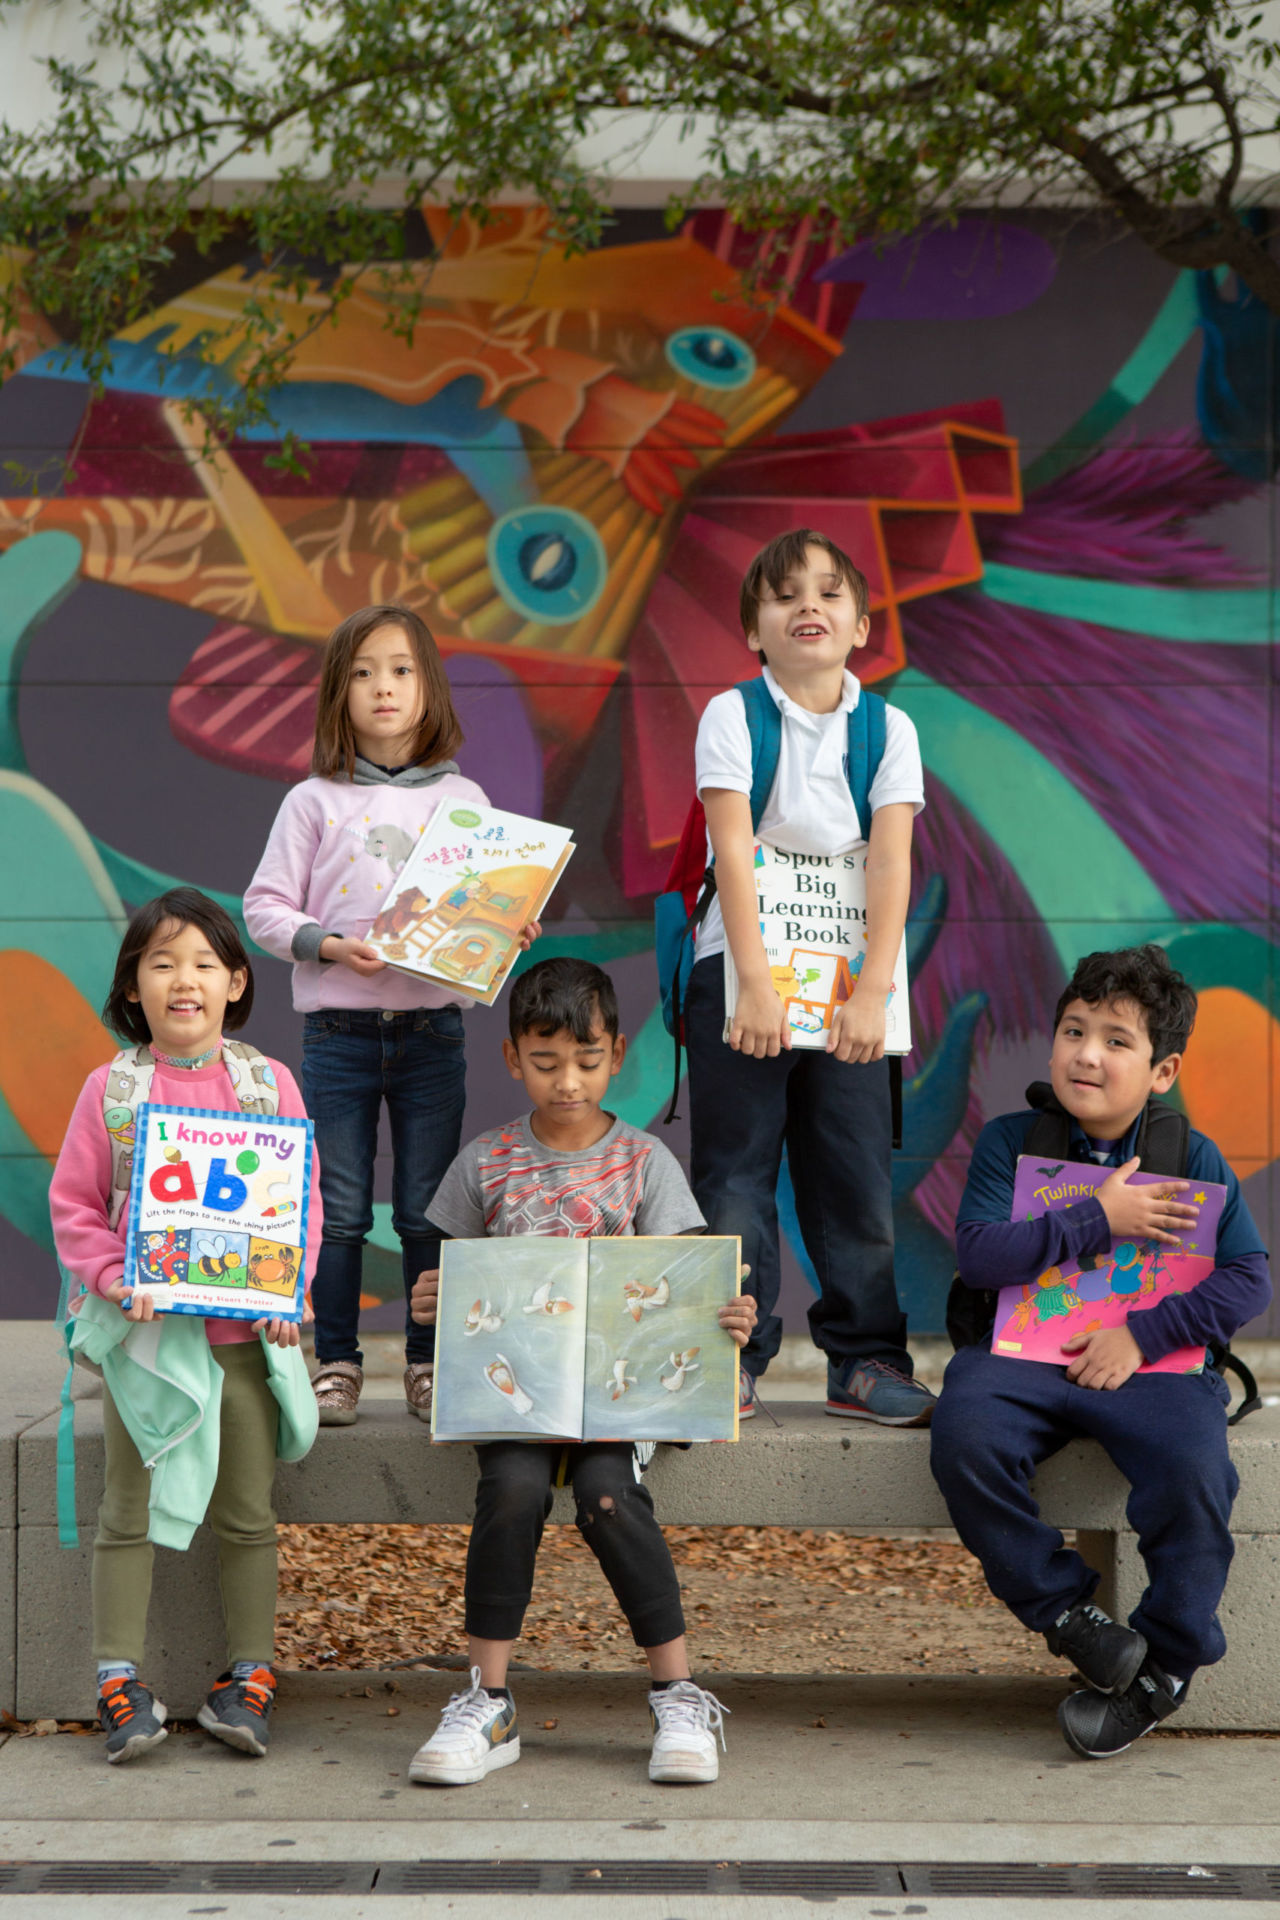 Elementary students with books and school mural